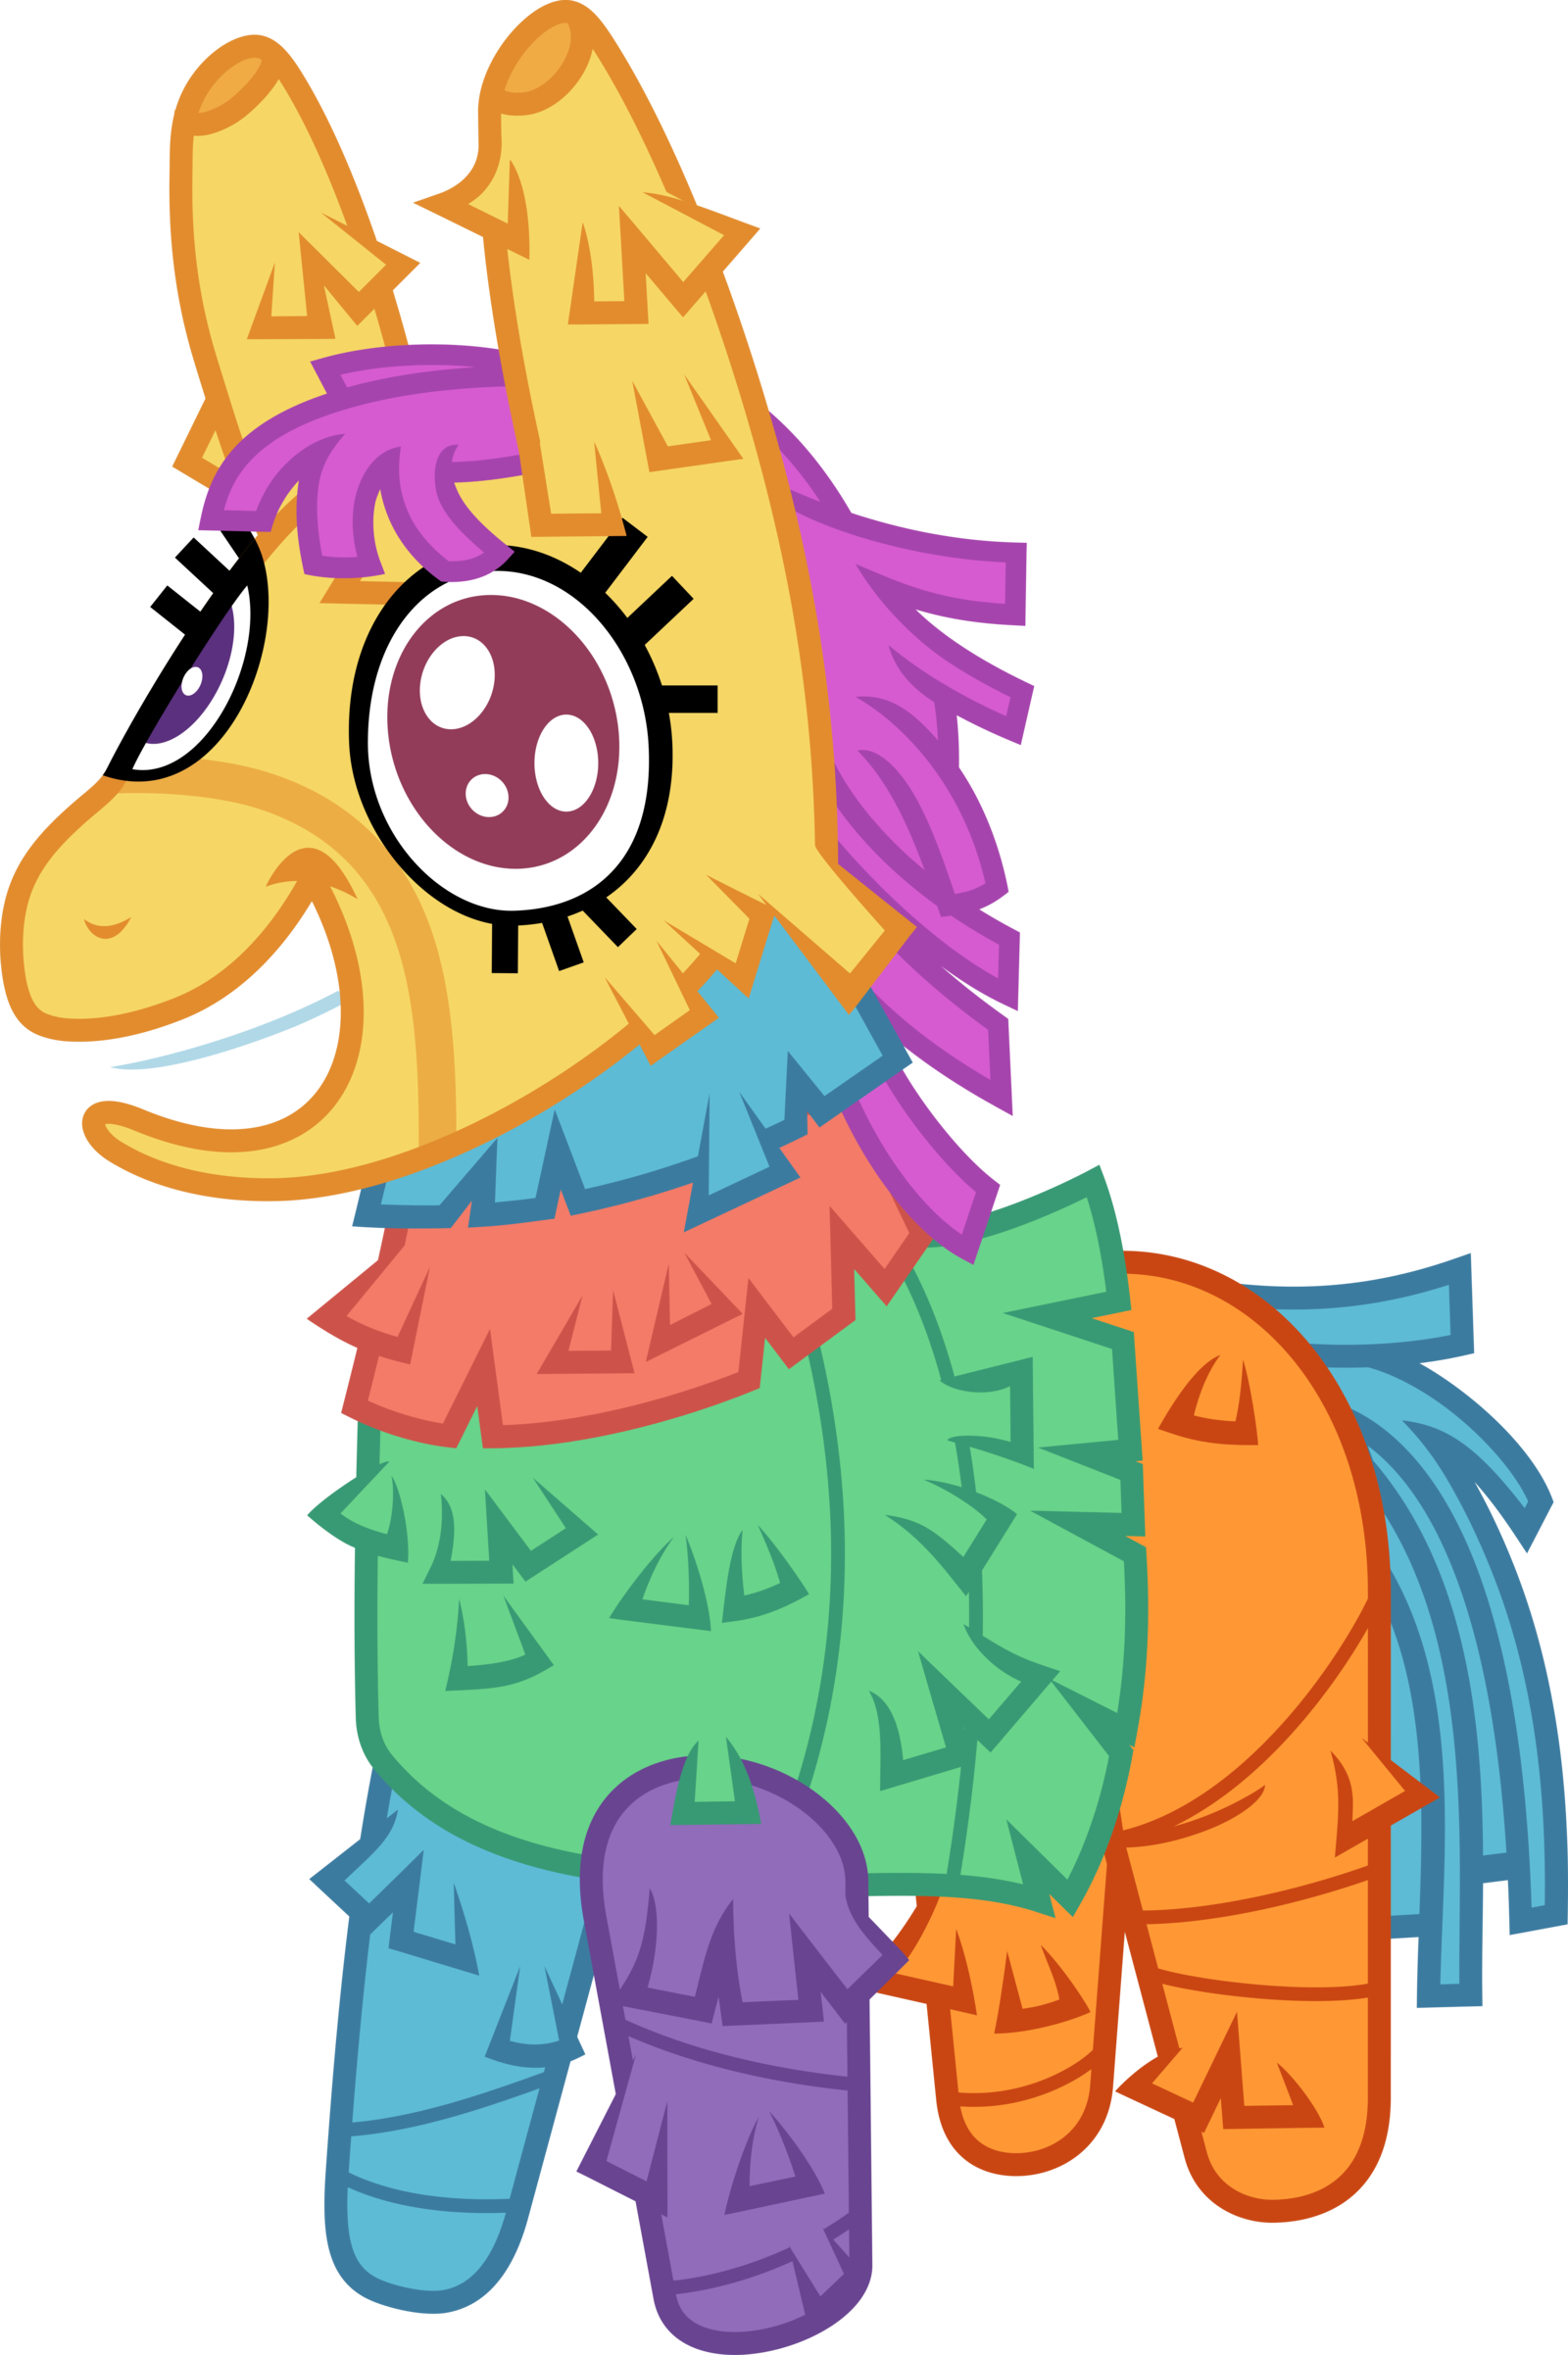 animated adult pinata images